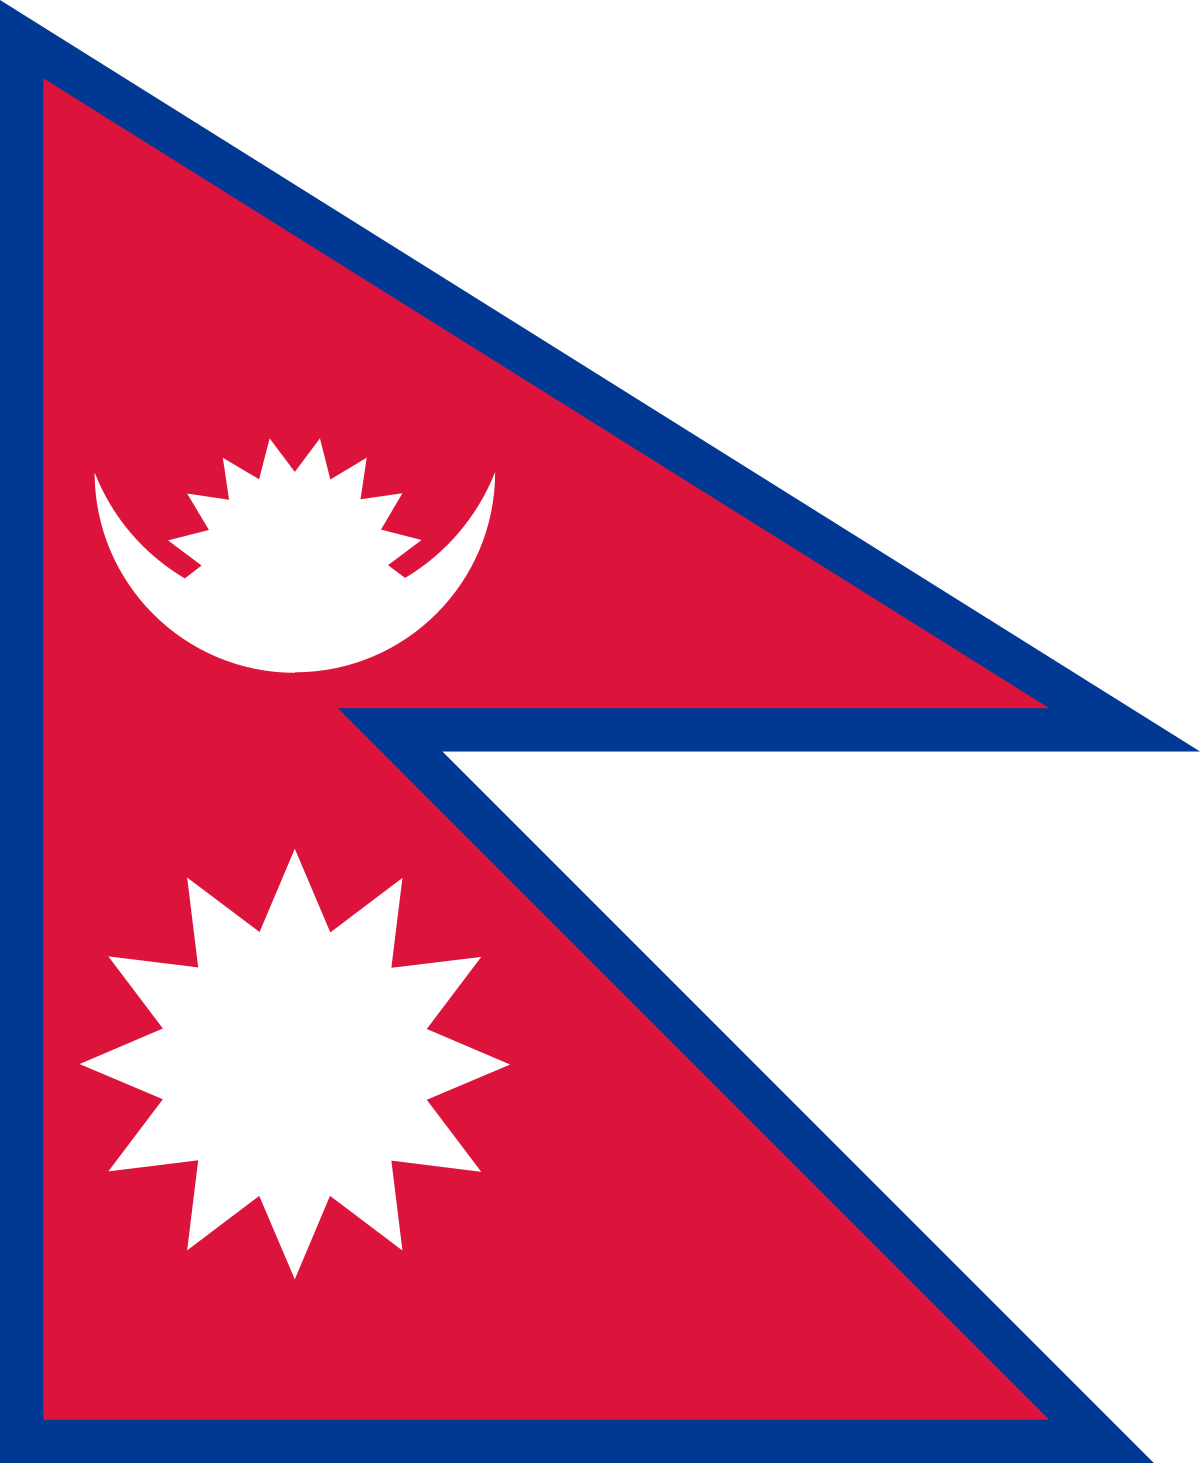 Two and 4 Red Triangles White Triangles Logo - Flag of Nepal